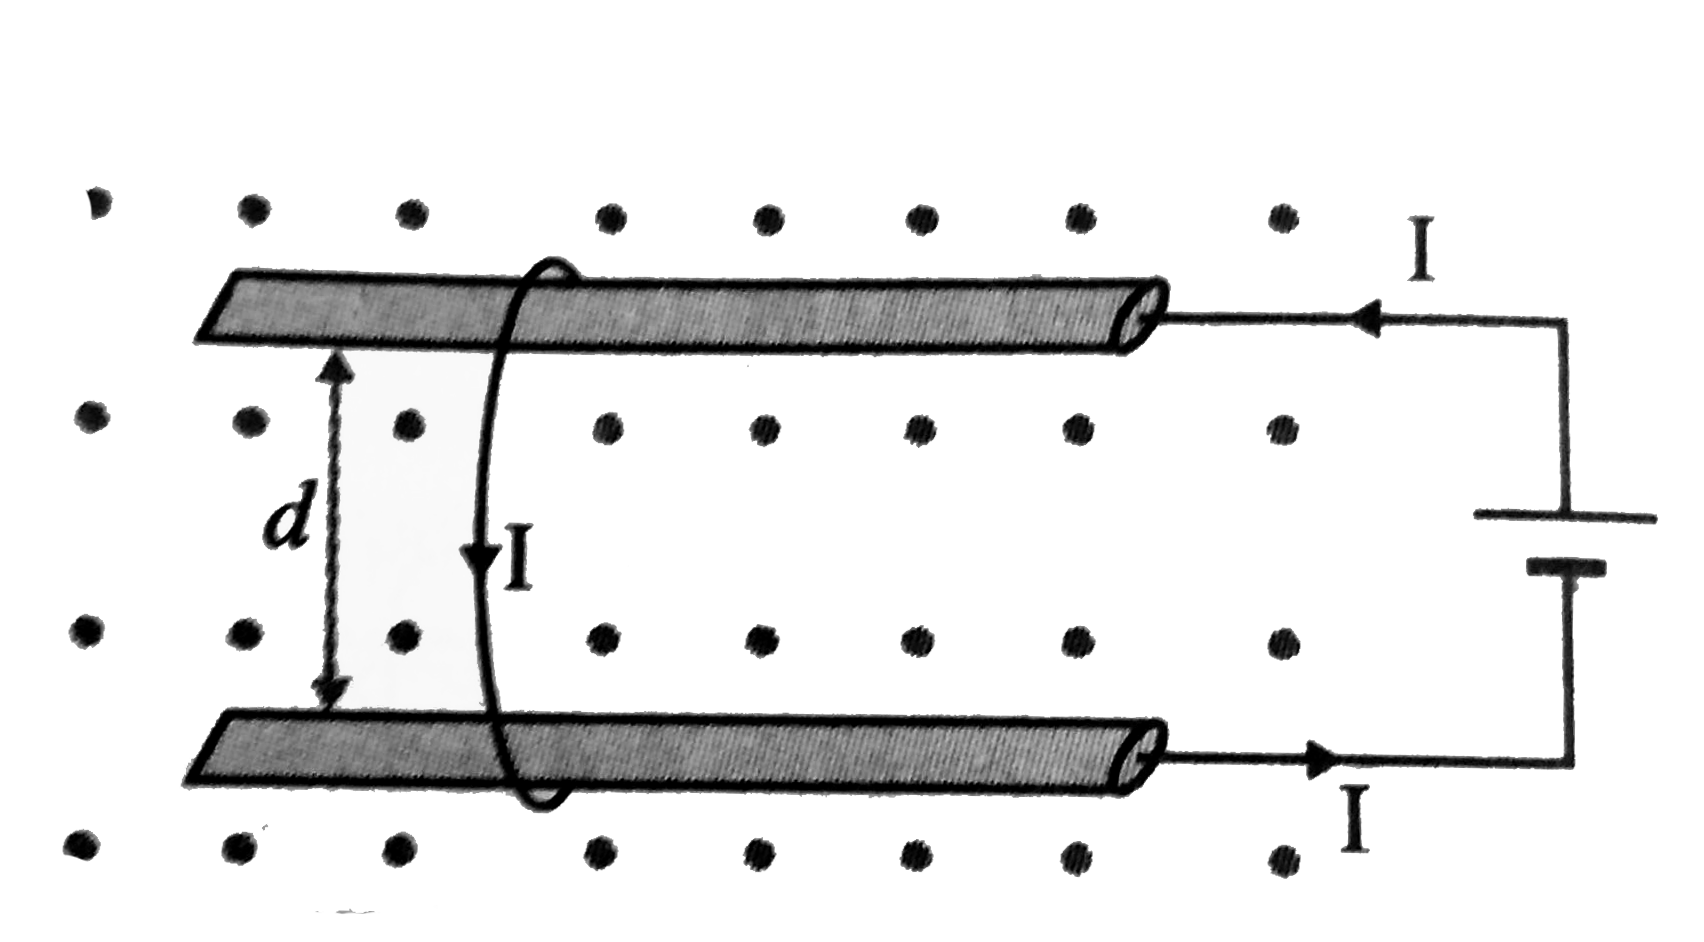 A metal wire of mass m slides without friction on two horizontal rails spaced distance d-apart as shown in figure. The rails are situated in a uniform magnetic field B, directed vertically upwards, and a battery is sending a current I through them. Find the velocity of the wire as a function of time, assuming it to be at rest initially.